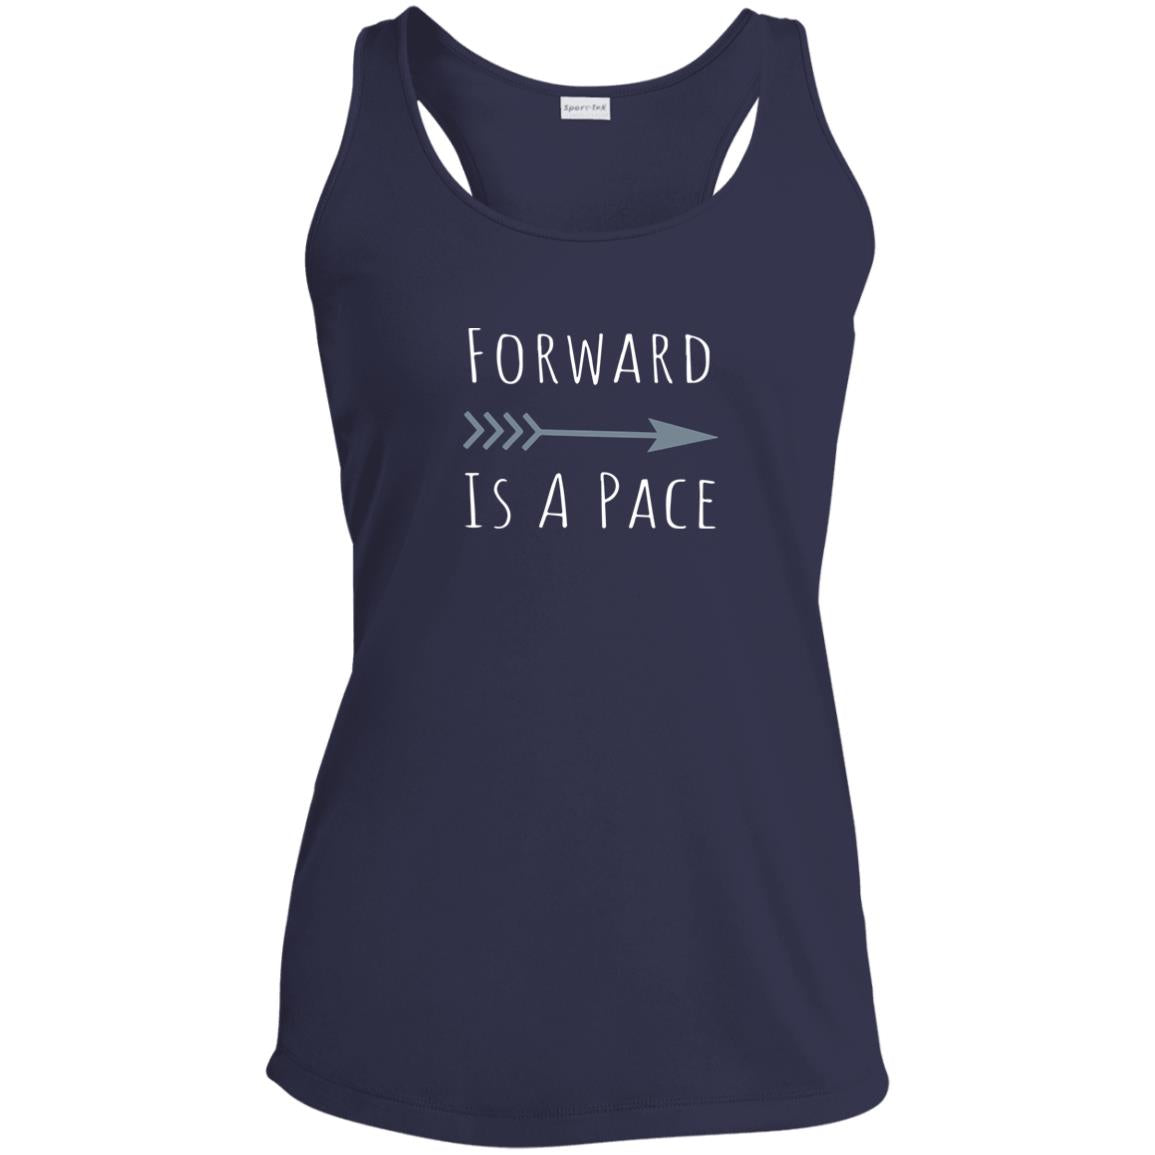 Forward is a pace Women's Performance Tanktop